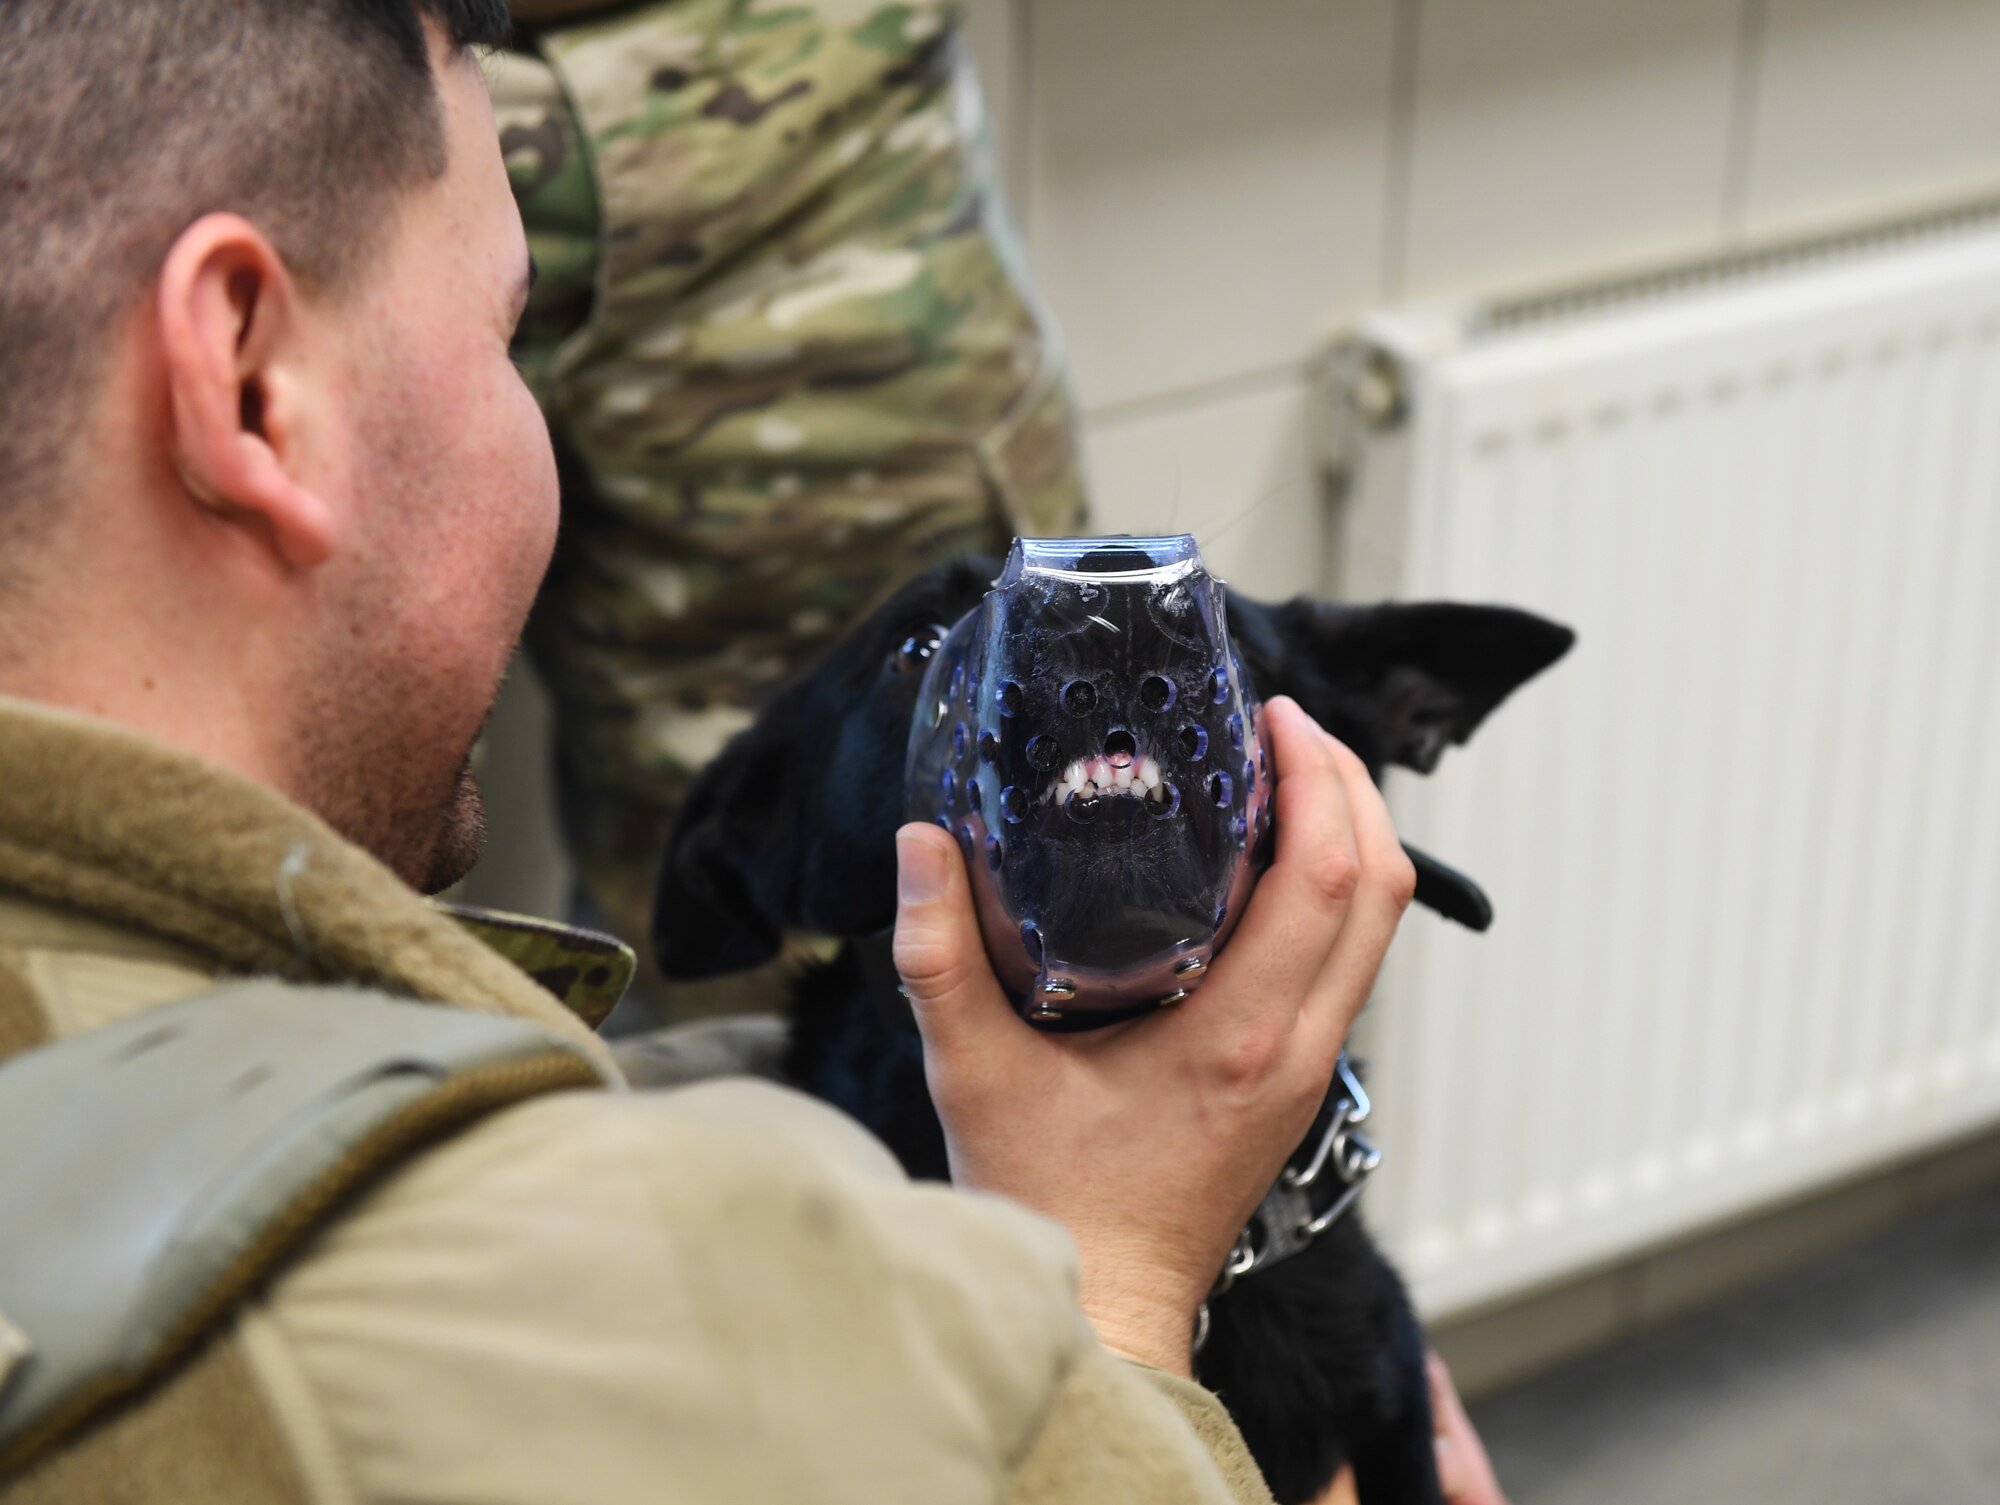 Ccatalina, 52nd Security Forces Squadron military working dog, wears a muzzle during a medical exam at Spangdahlem Air Base, Germany, Mar. 5, 2020. The muzzle is necessary for some MWDs during an exam when blood is drawn or vaccines are given, to protect the vet and technician from being bitten. (U.S. Air Force photo by Airman 1st Class Alison Stewart)